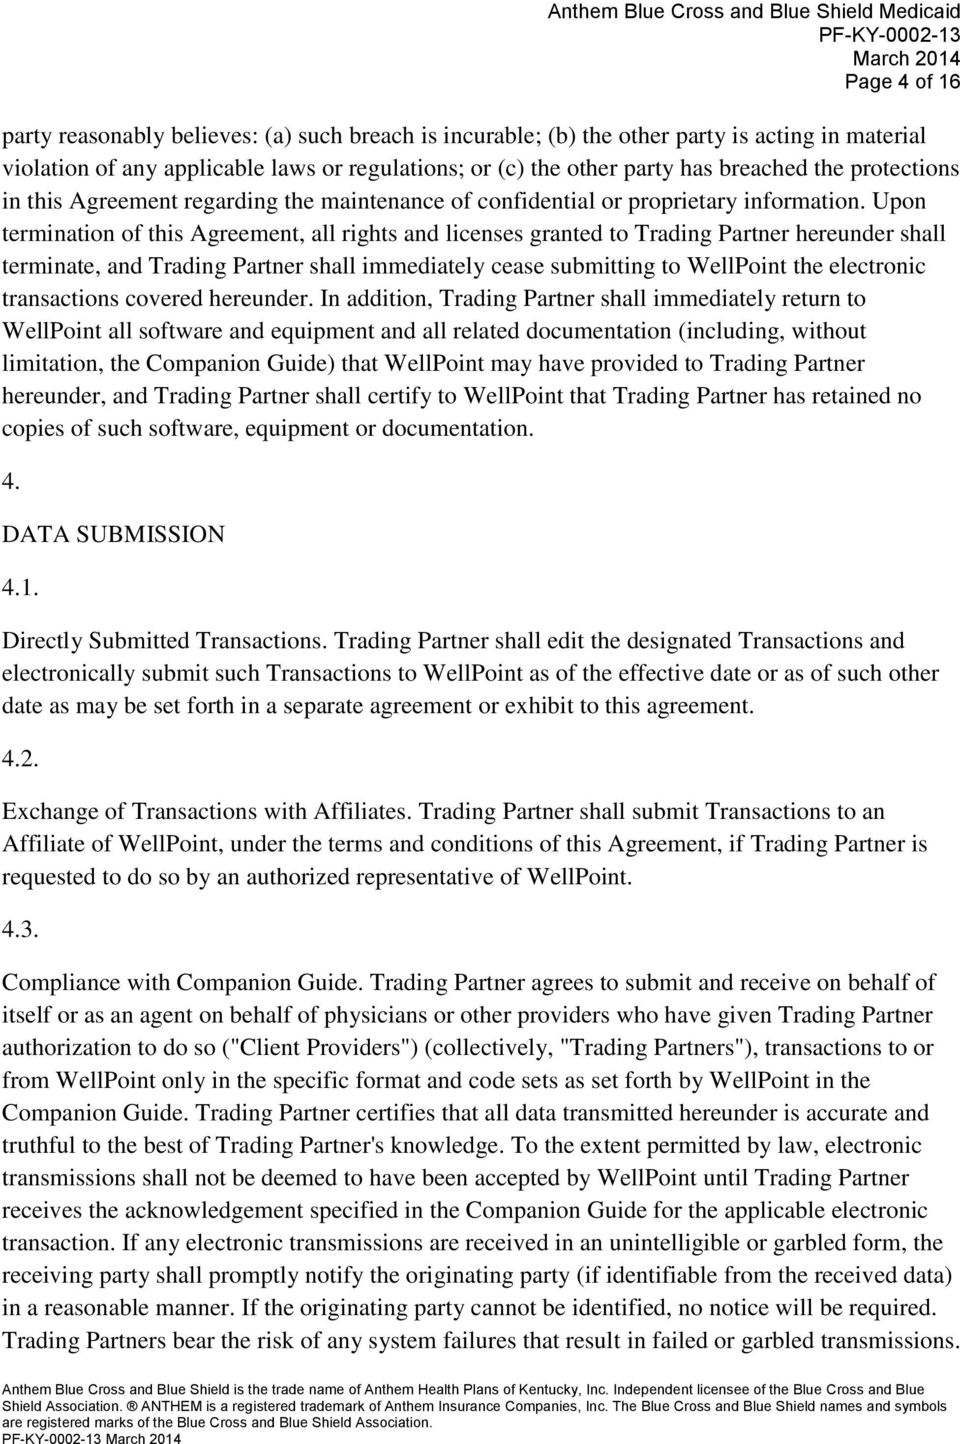 Upon termination of this Agreement, all rights and licenses granted to Trading Partner hereunder shall terminate, and Trading Partner shall immediately cease submitting to WellPoint the electronic